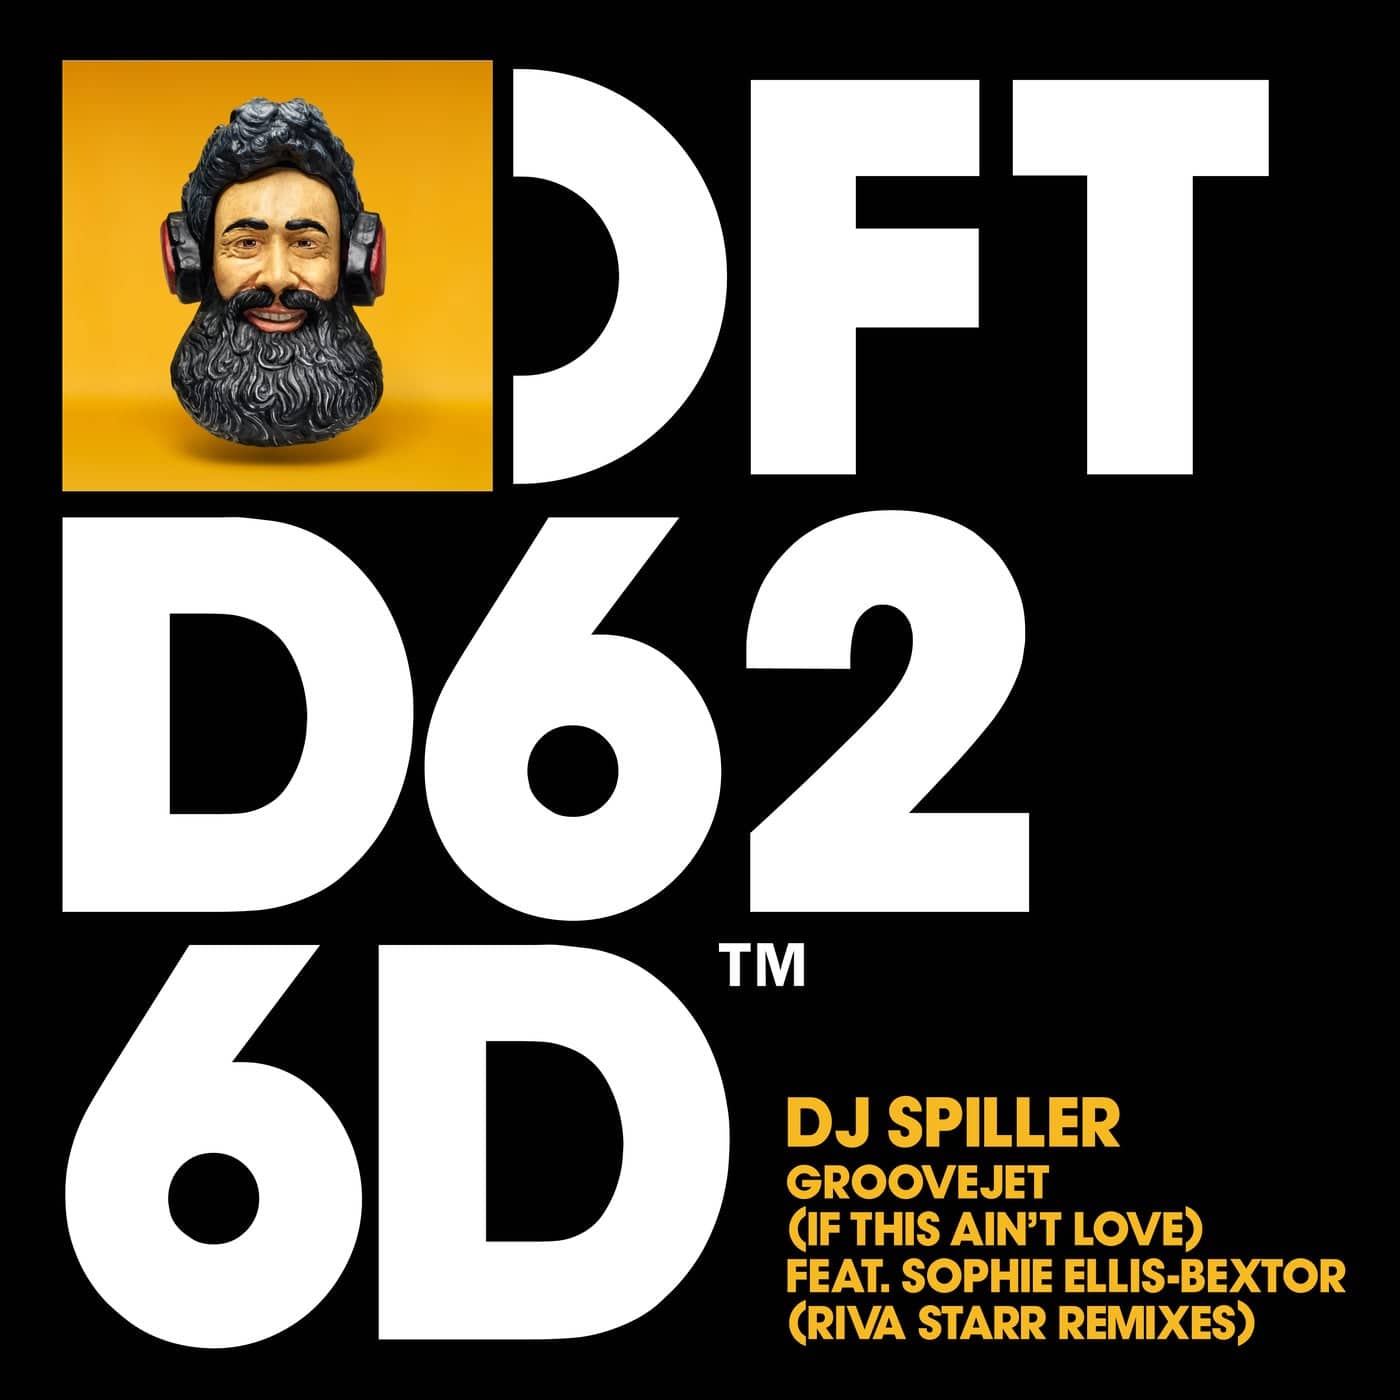 image cover: Sophie Ellis-Bextor, DJ Spiller - Groovejet (If This Ain't Love) - Riva Starr Remixes / DFTD626D12